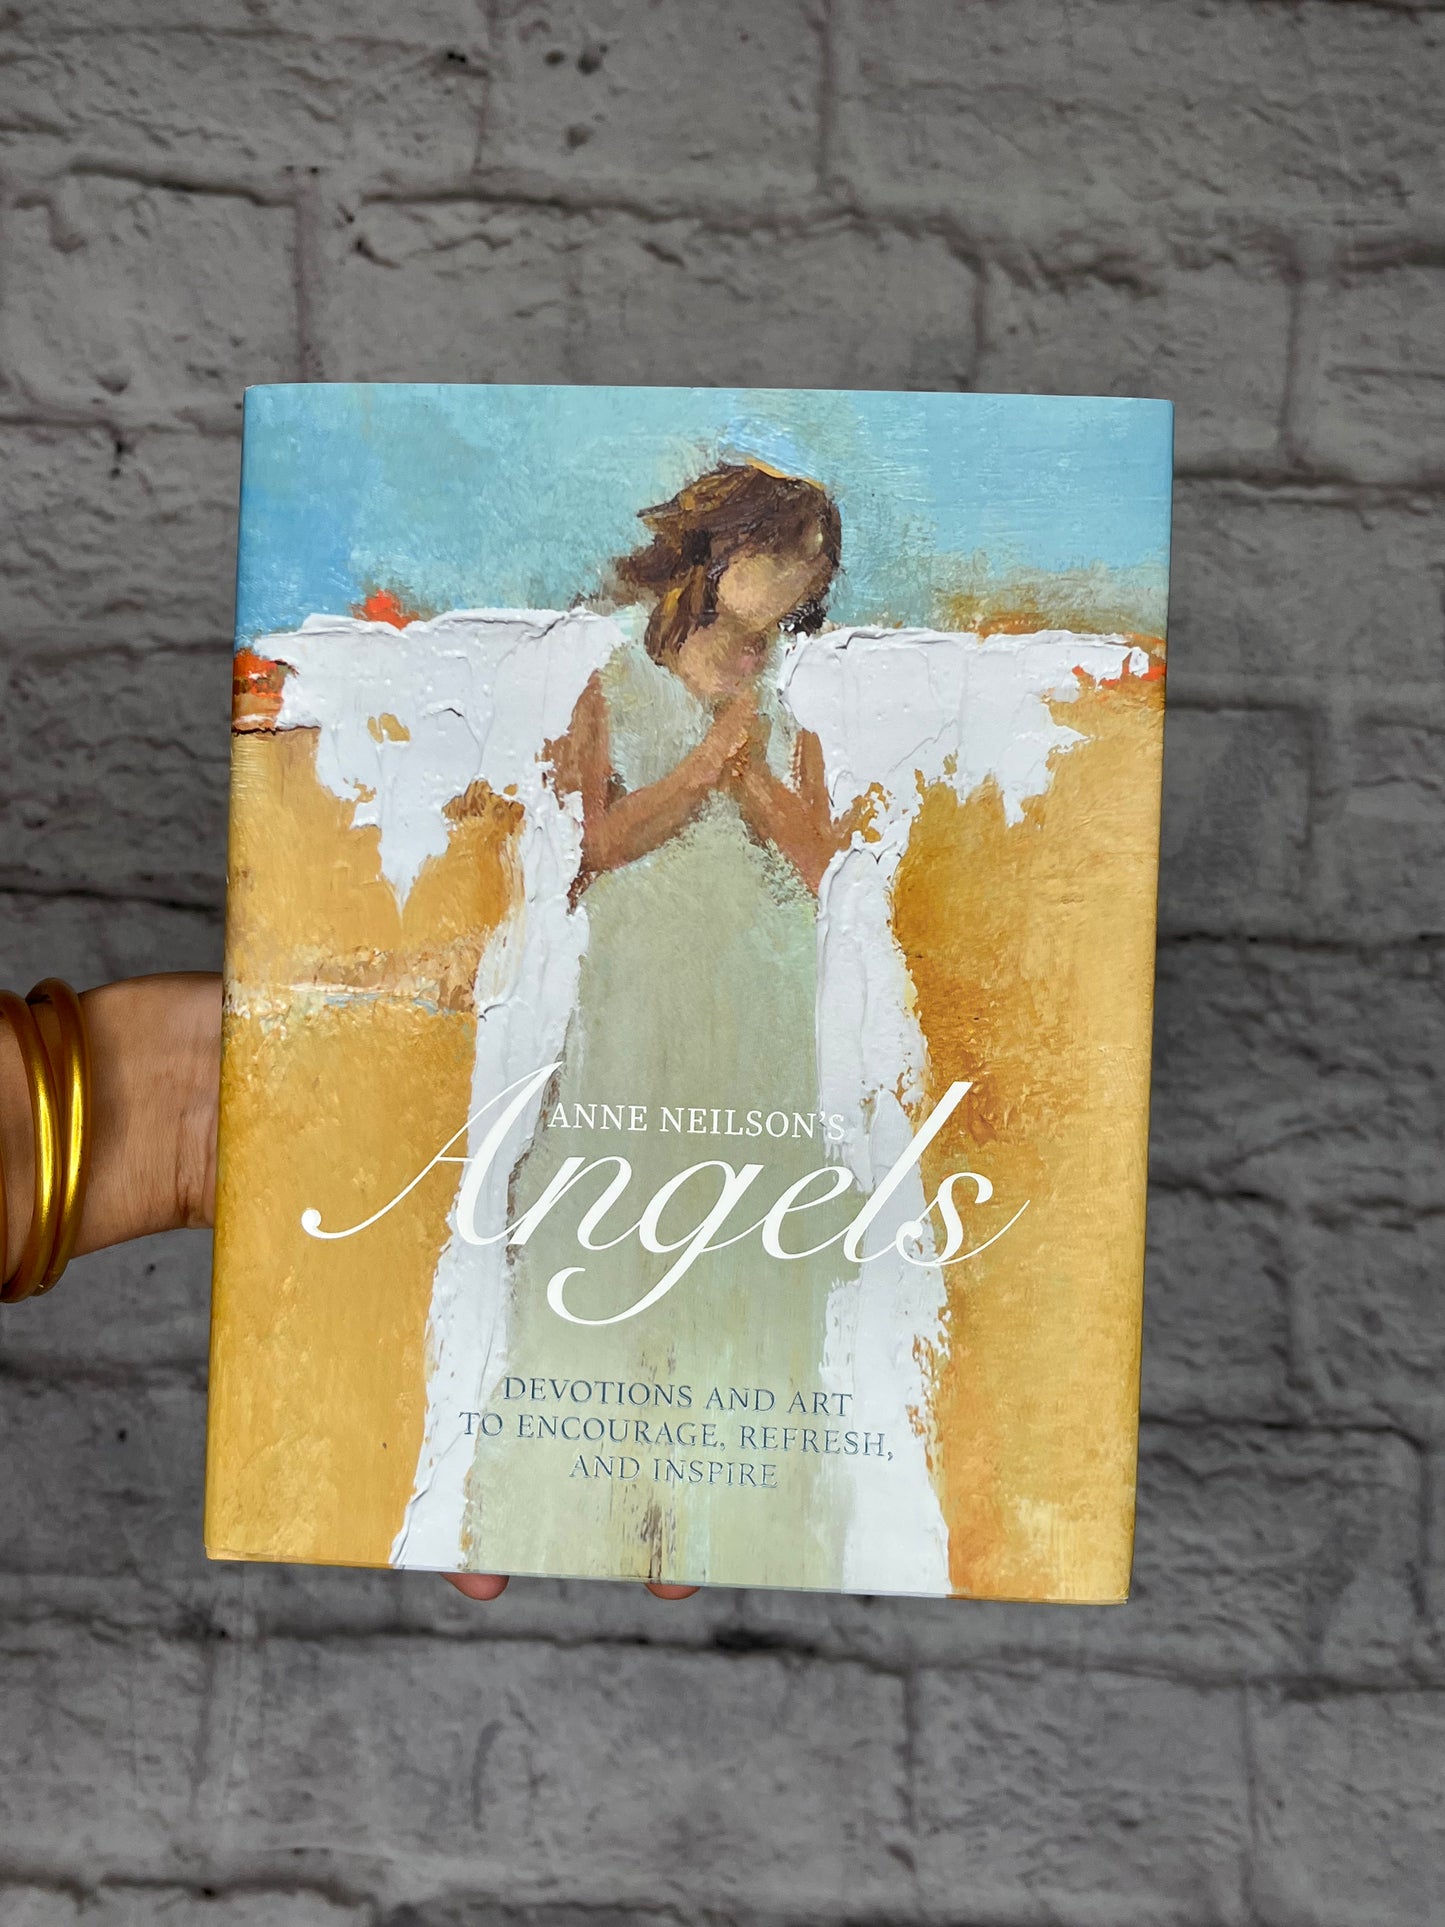 Anne Nelson’s Angels